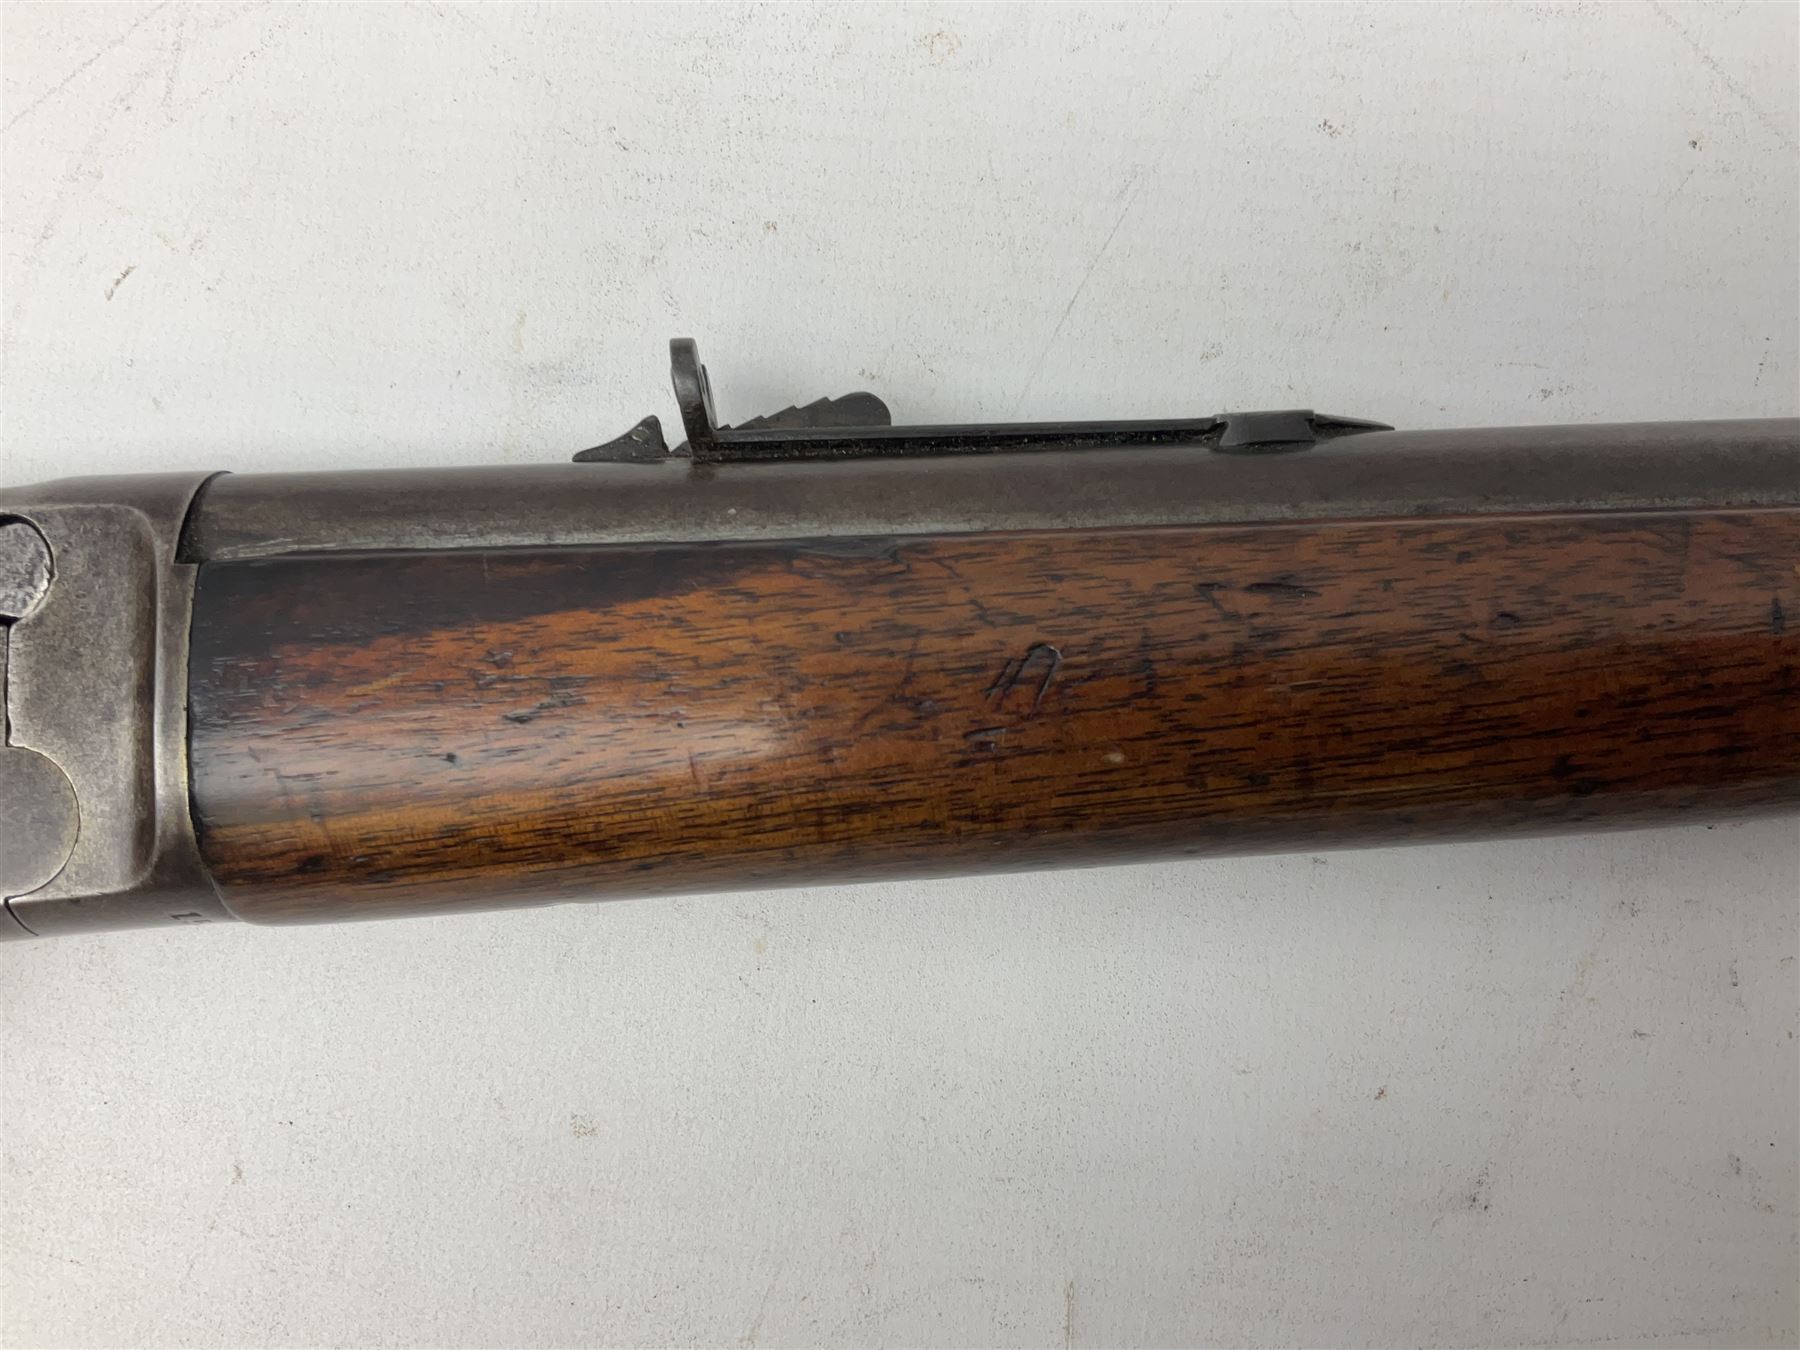 Marlin Firearms Co. USA 'Safety' .32 rim-fire rifle dated 1892 - Image 5 of 15